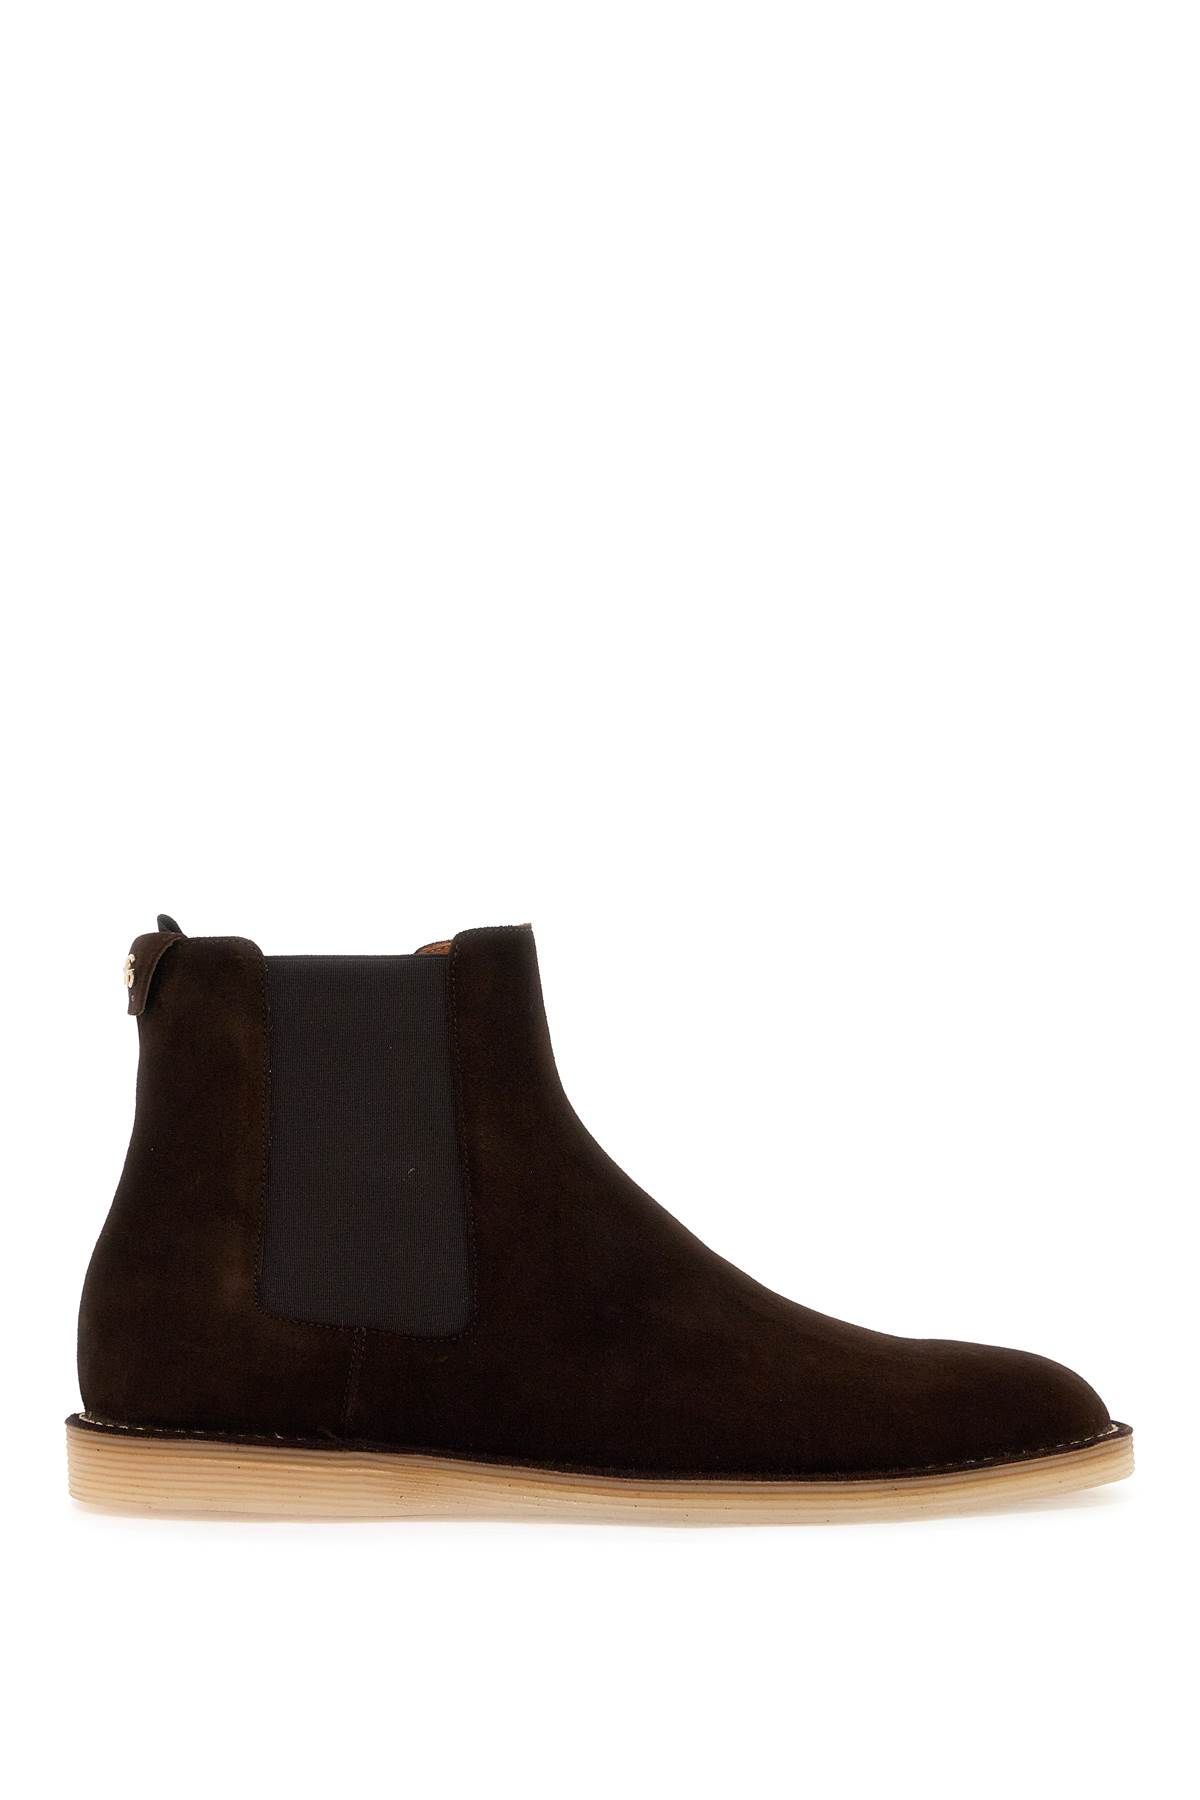 Dolce & Gabbana DOLCE & GABBANA suede ankle boots for